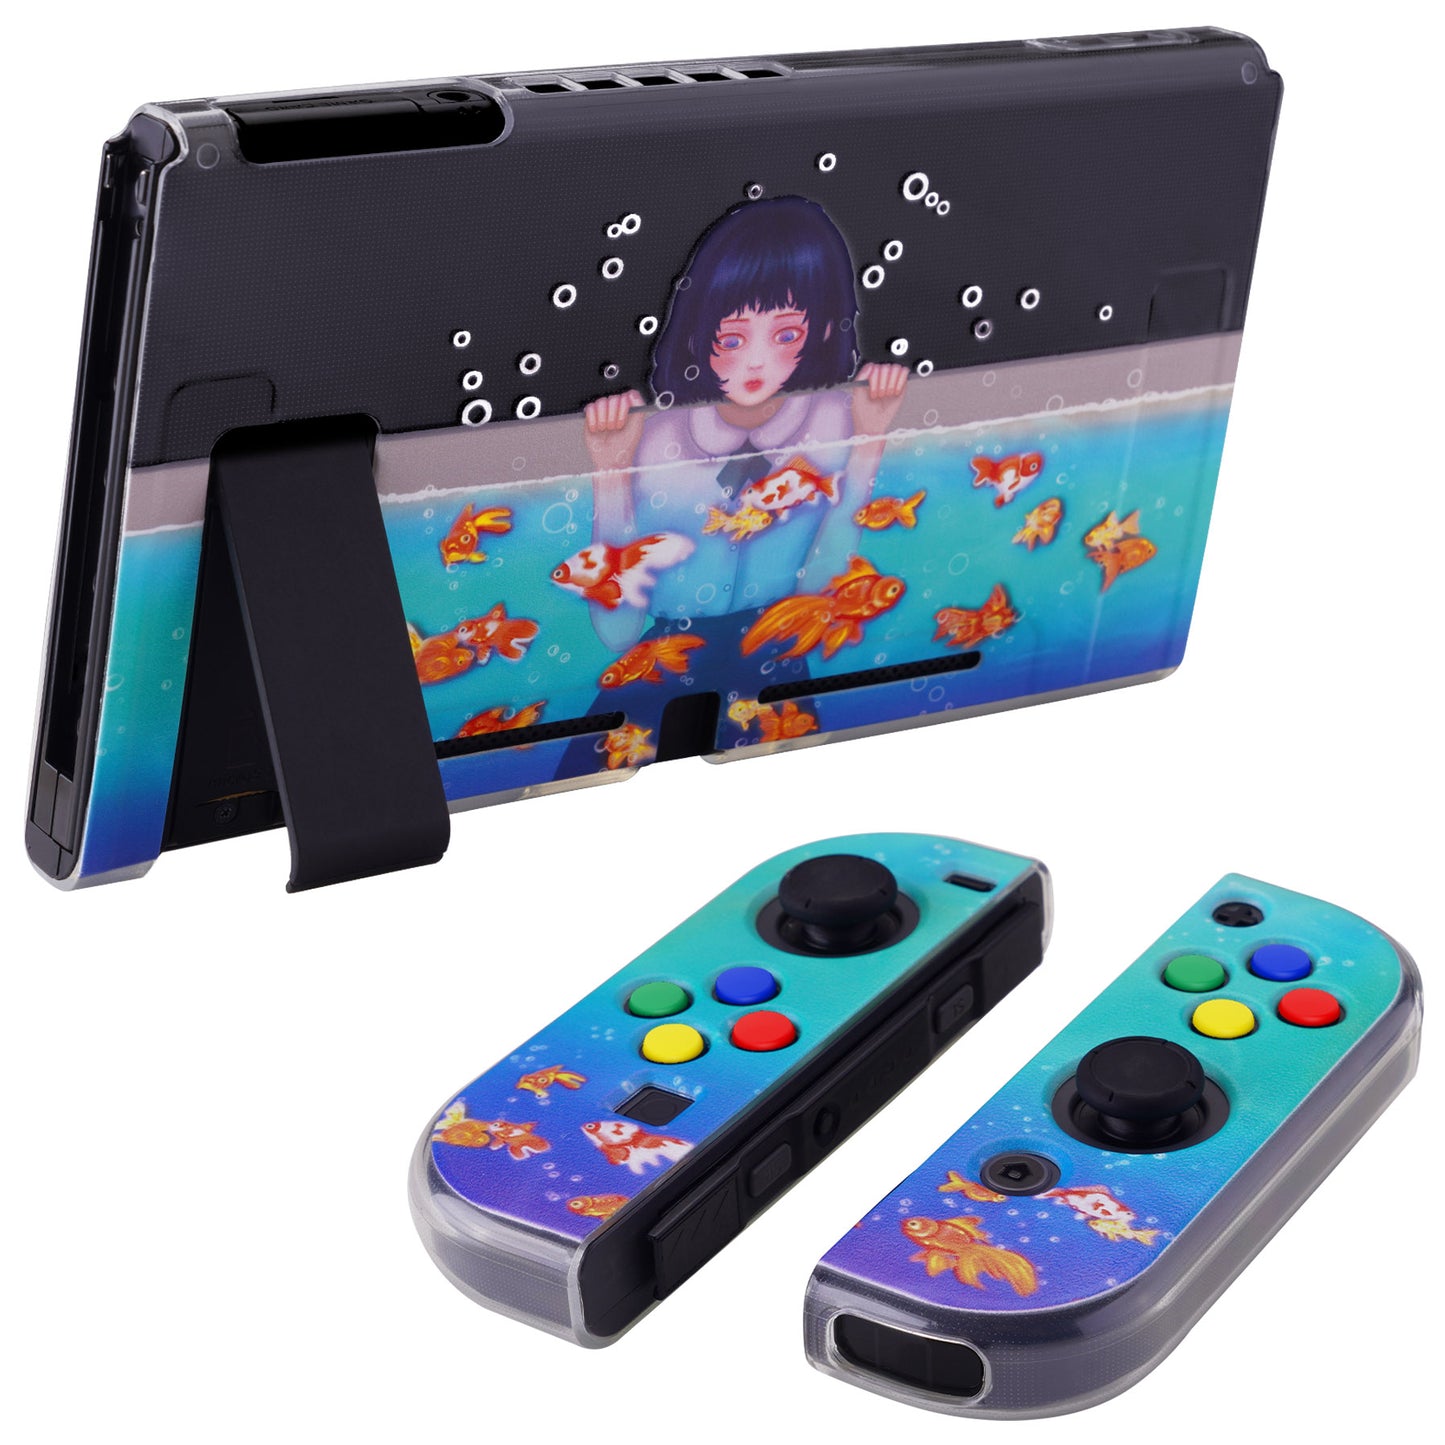 PlayVital Transparent Protective Case for NS Switch, Soft TPU Slim Case Cover for NS Switch Joycon Console with ColorfulABXY Direction Button Caps - Aquarium Girl - NTU6029 PlayVital